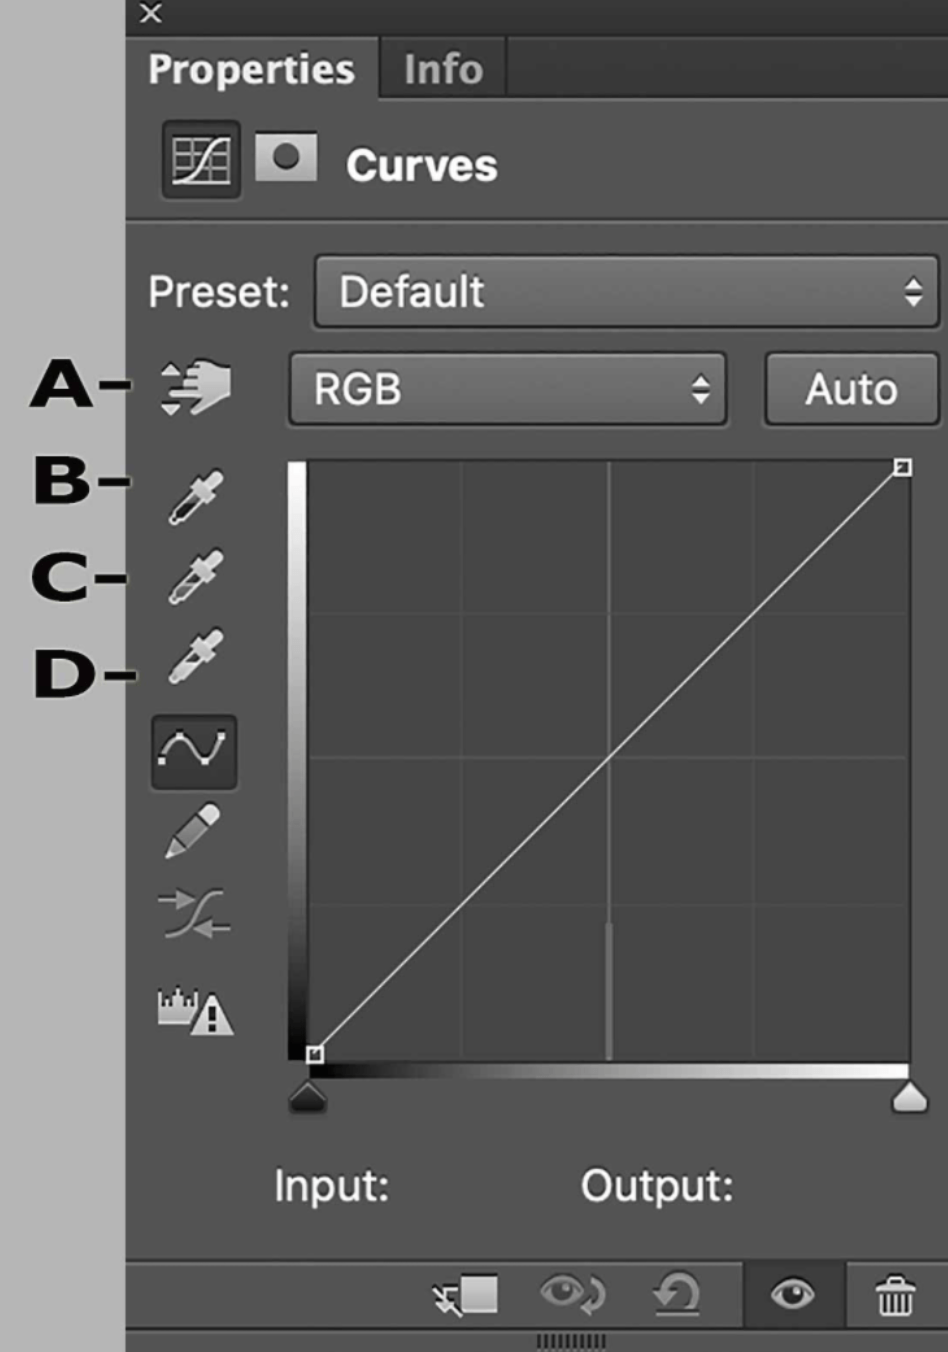 Which RGB control do you click to add a single control point to the Curves adjustment?